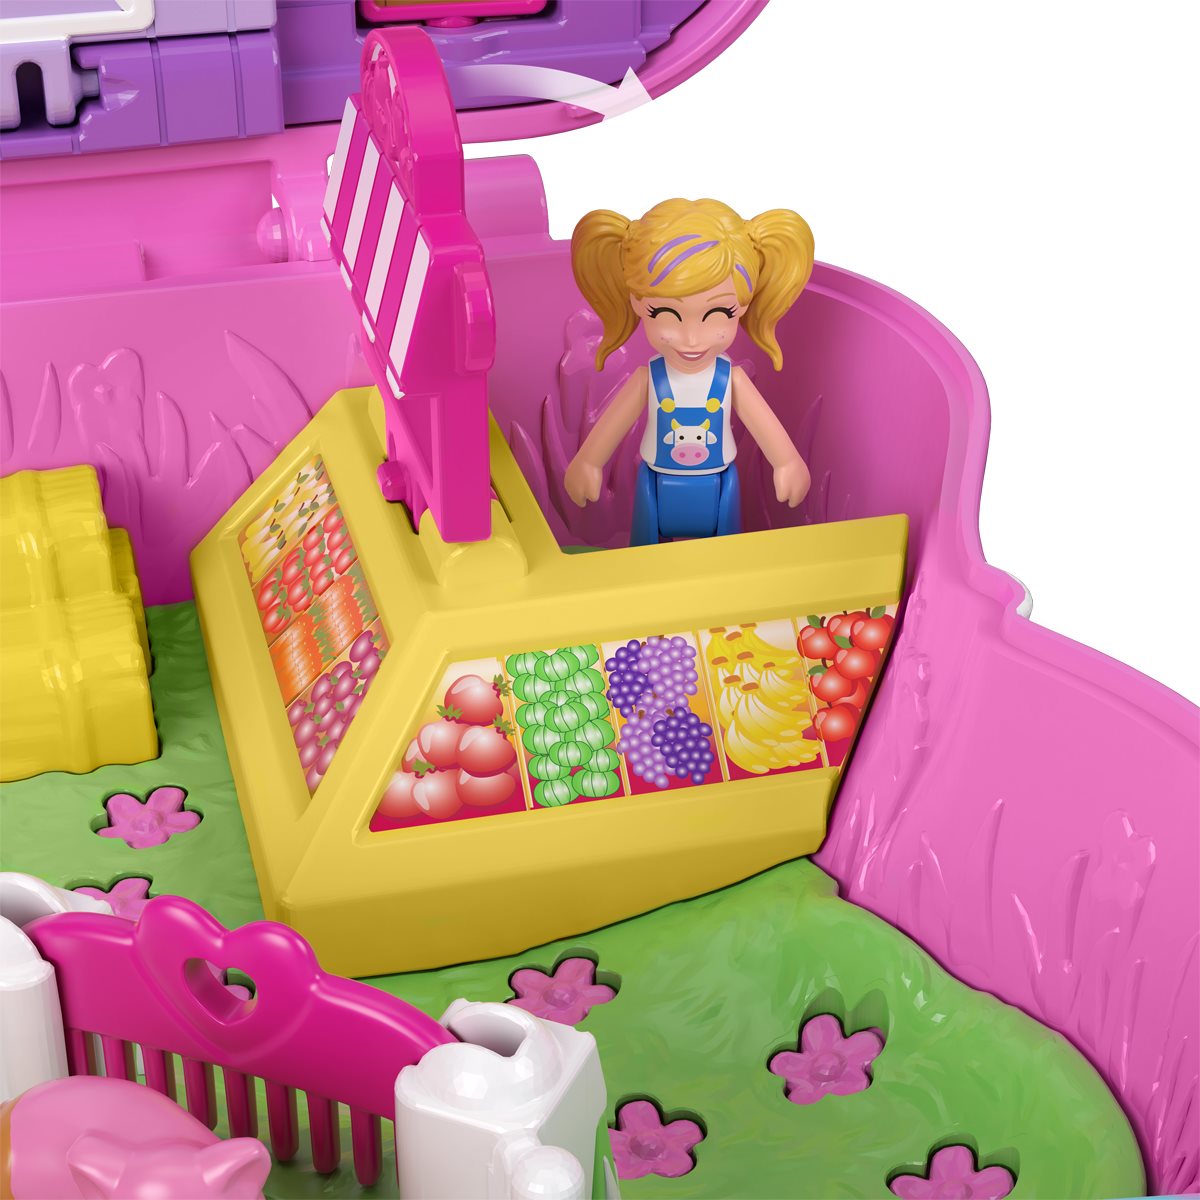 Everything 2000s  Polly pocket, Polly pocket games, Childhood games